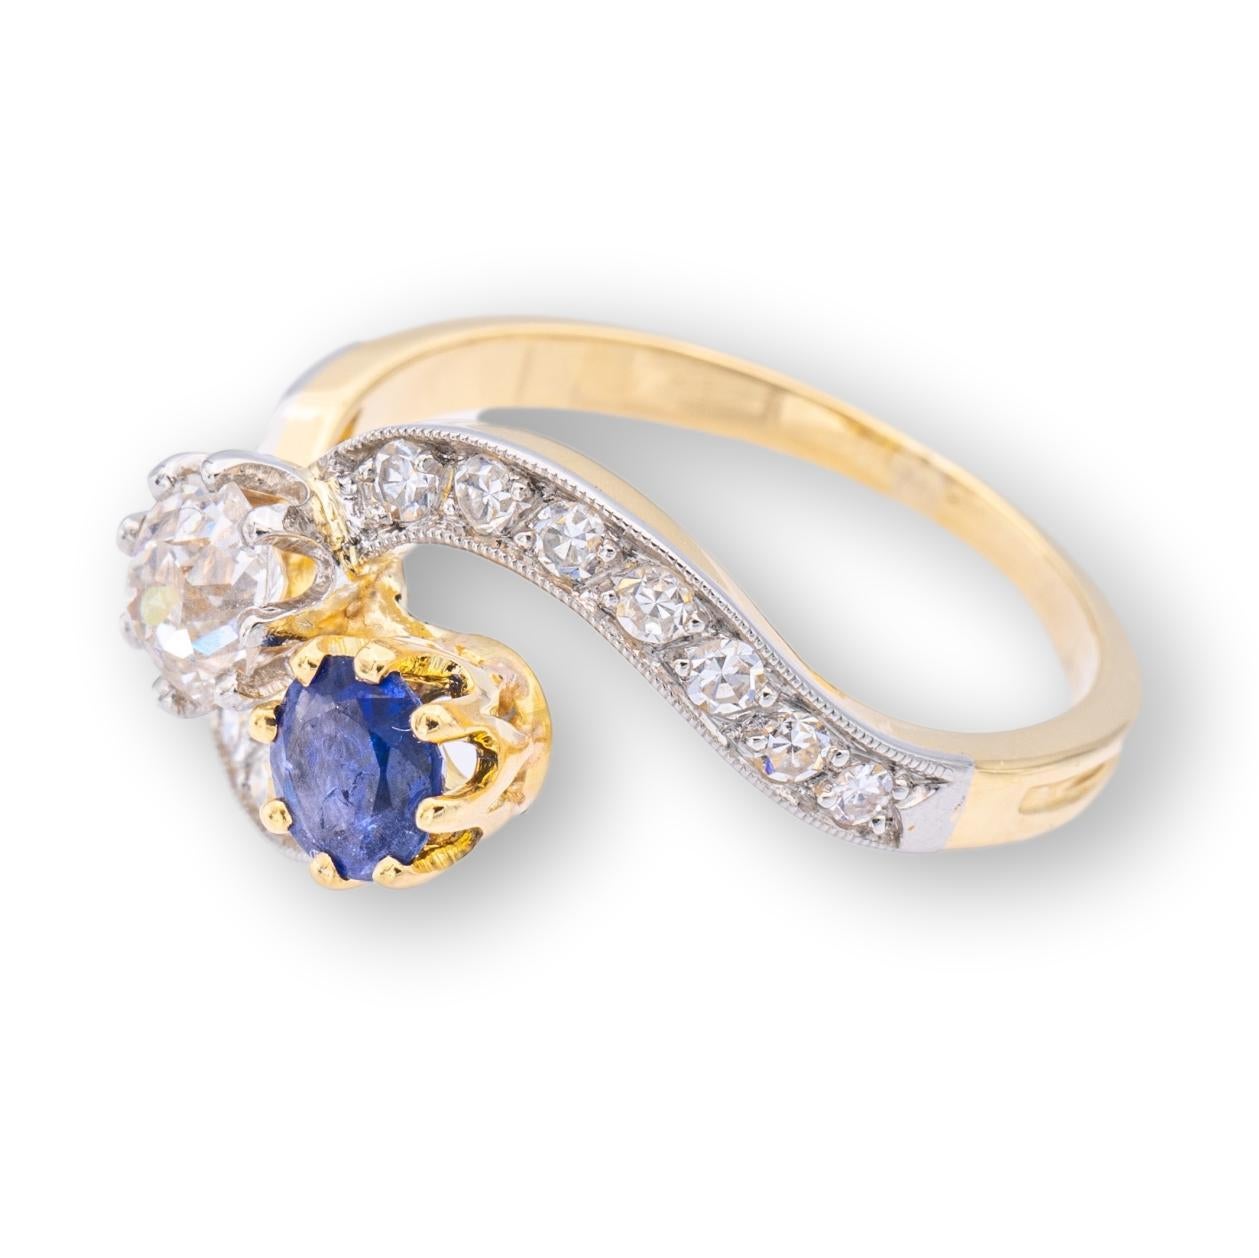 Antique Diamond and Sapphire French Bypass Ring Platinum 18KY Gold Circa 1890's In Good Condition For Sale In New York, NY